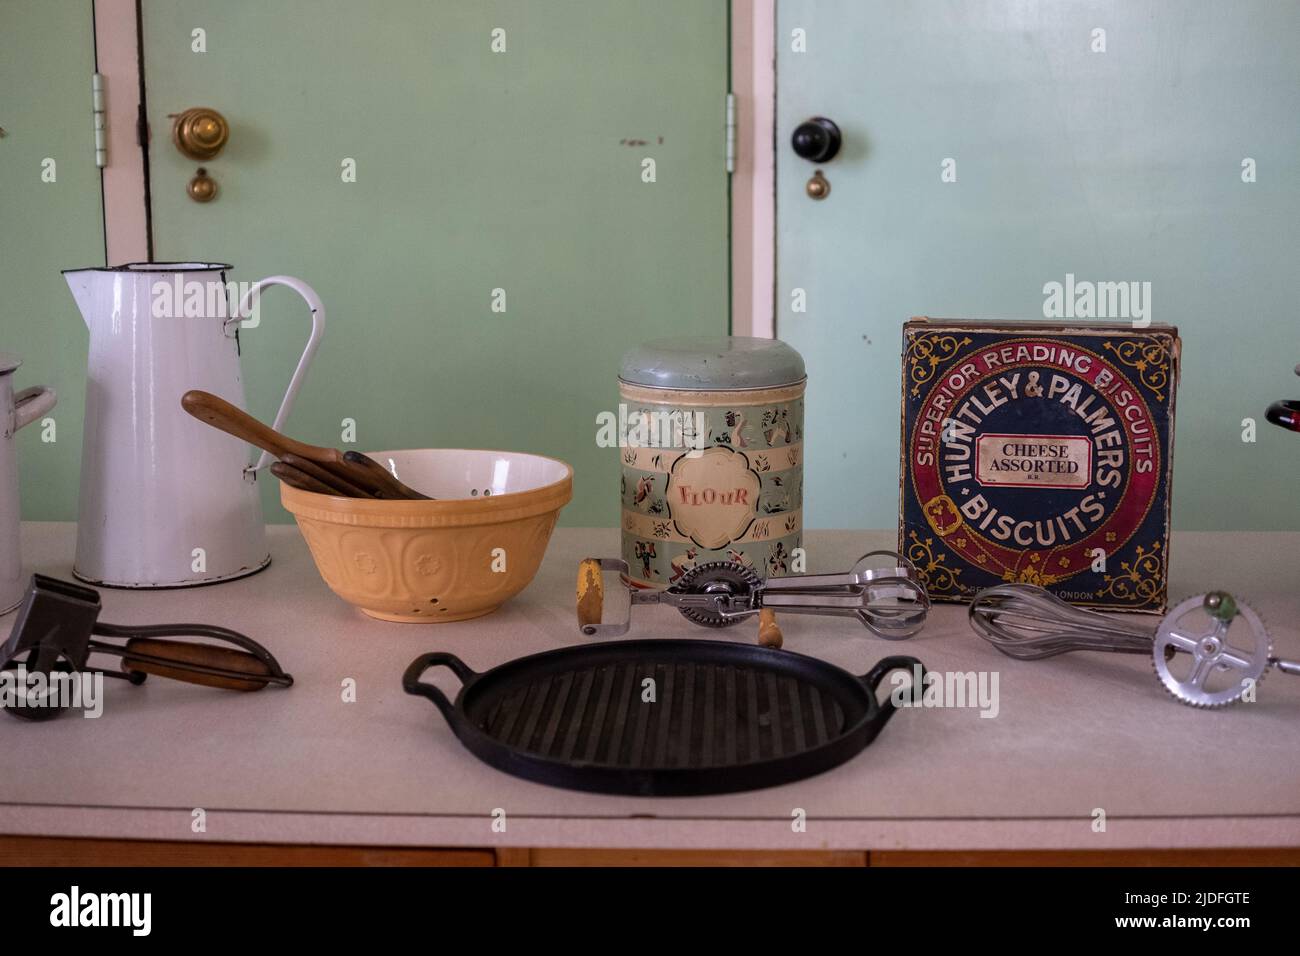 Huntley and Palmer Biscuits along with other kitchen items at Basildon Park Stock Photo